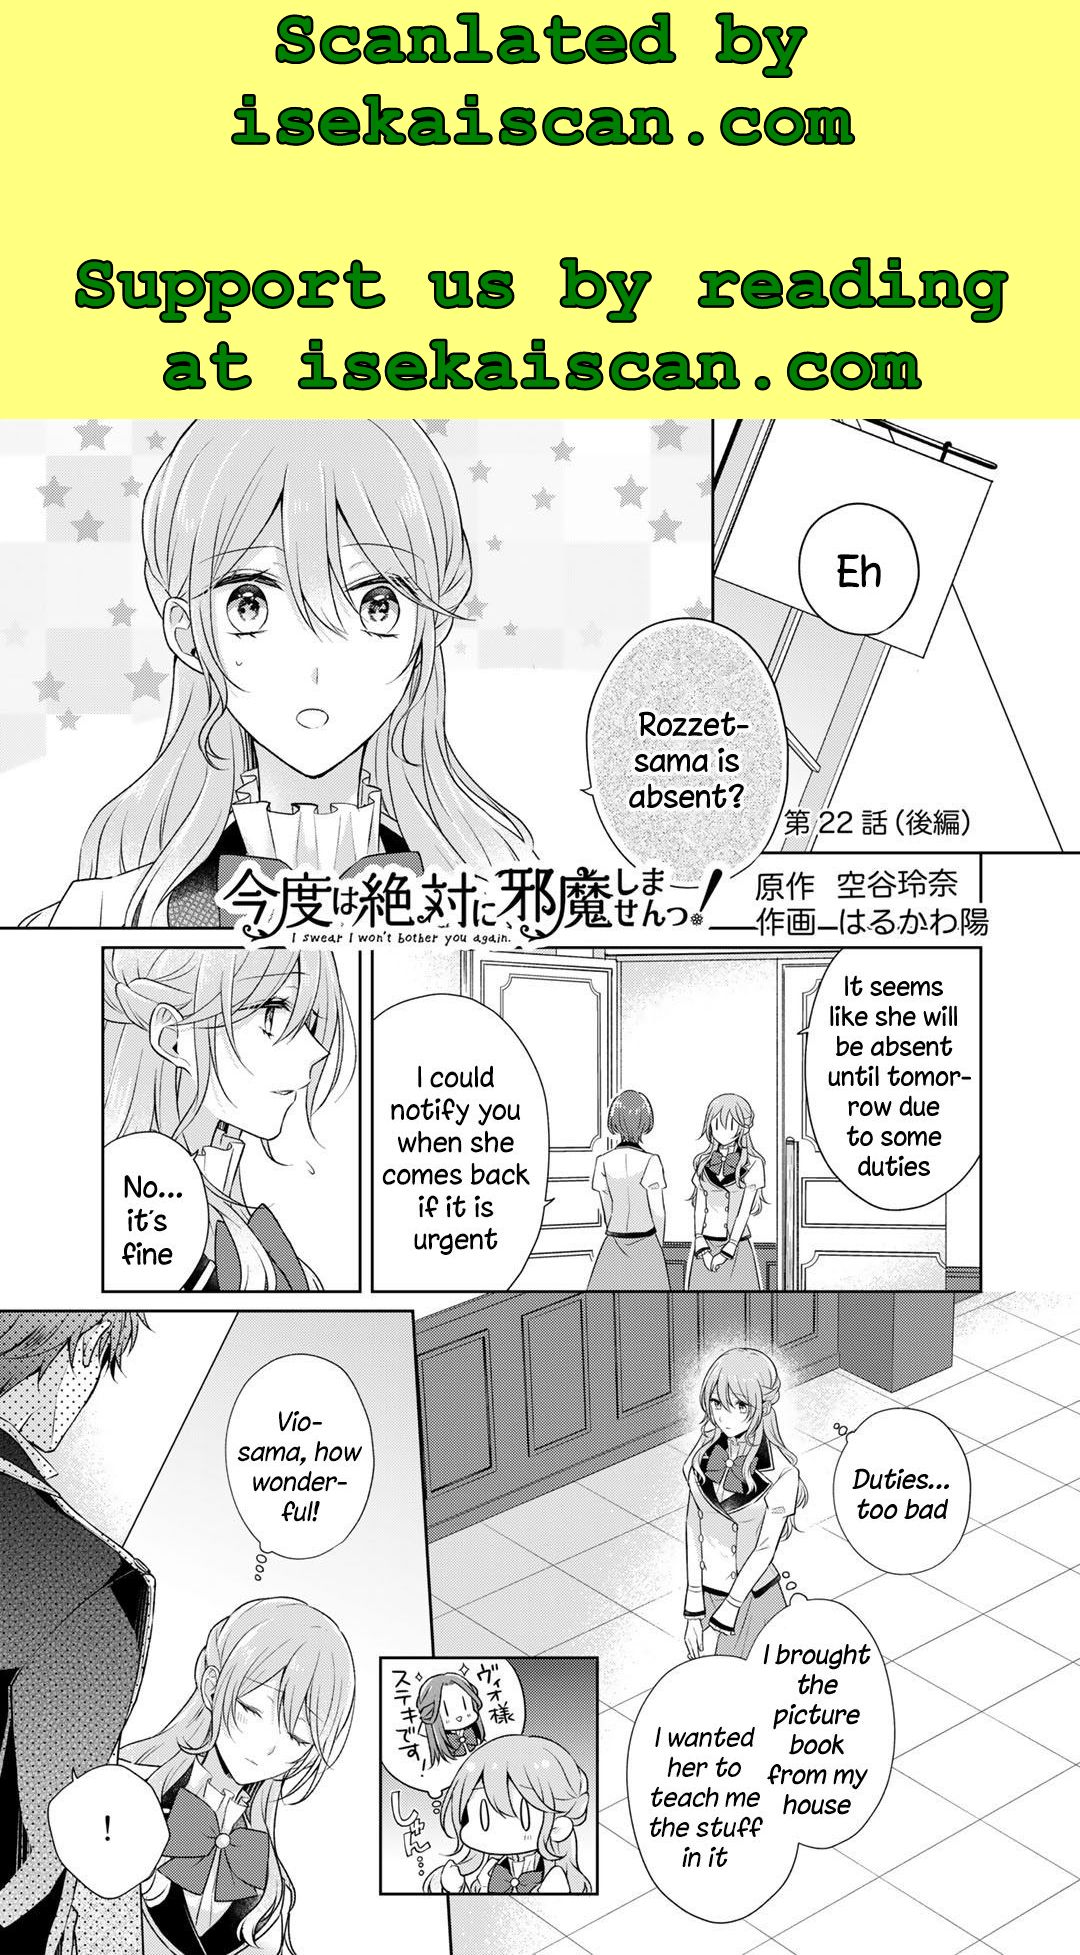 I Swear I Won't Bother You Again! - chapter 22.2 - #1